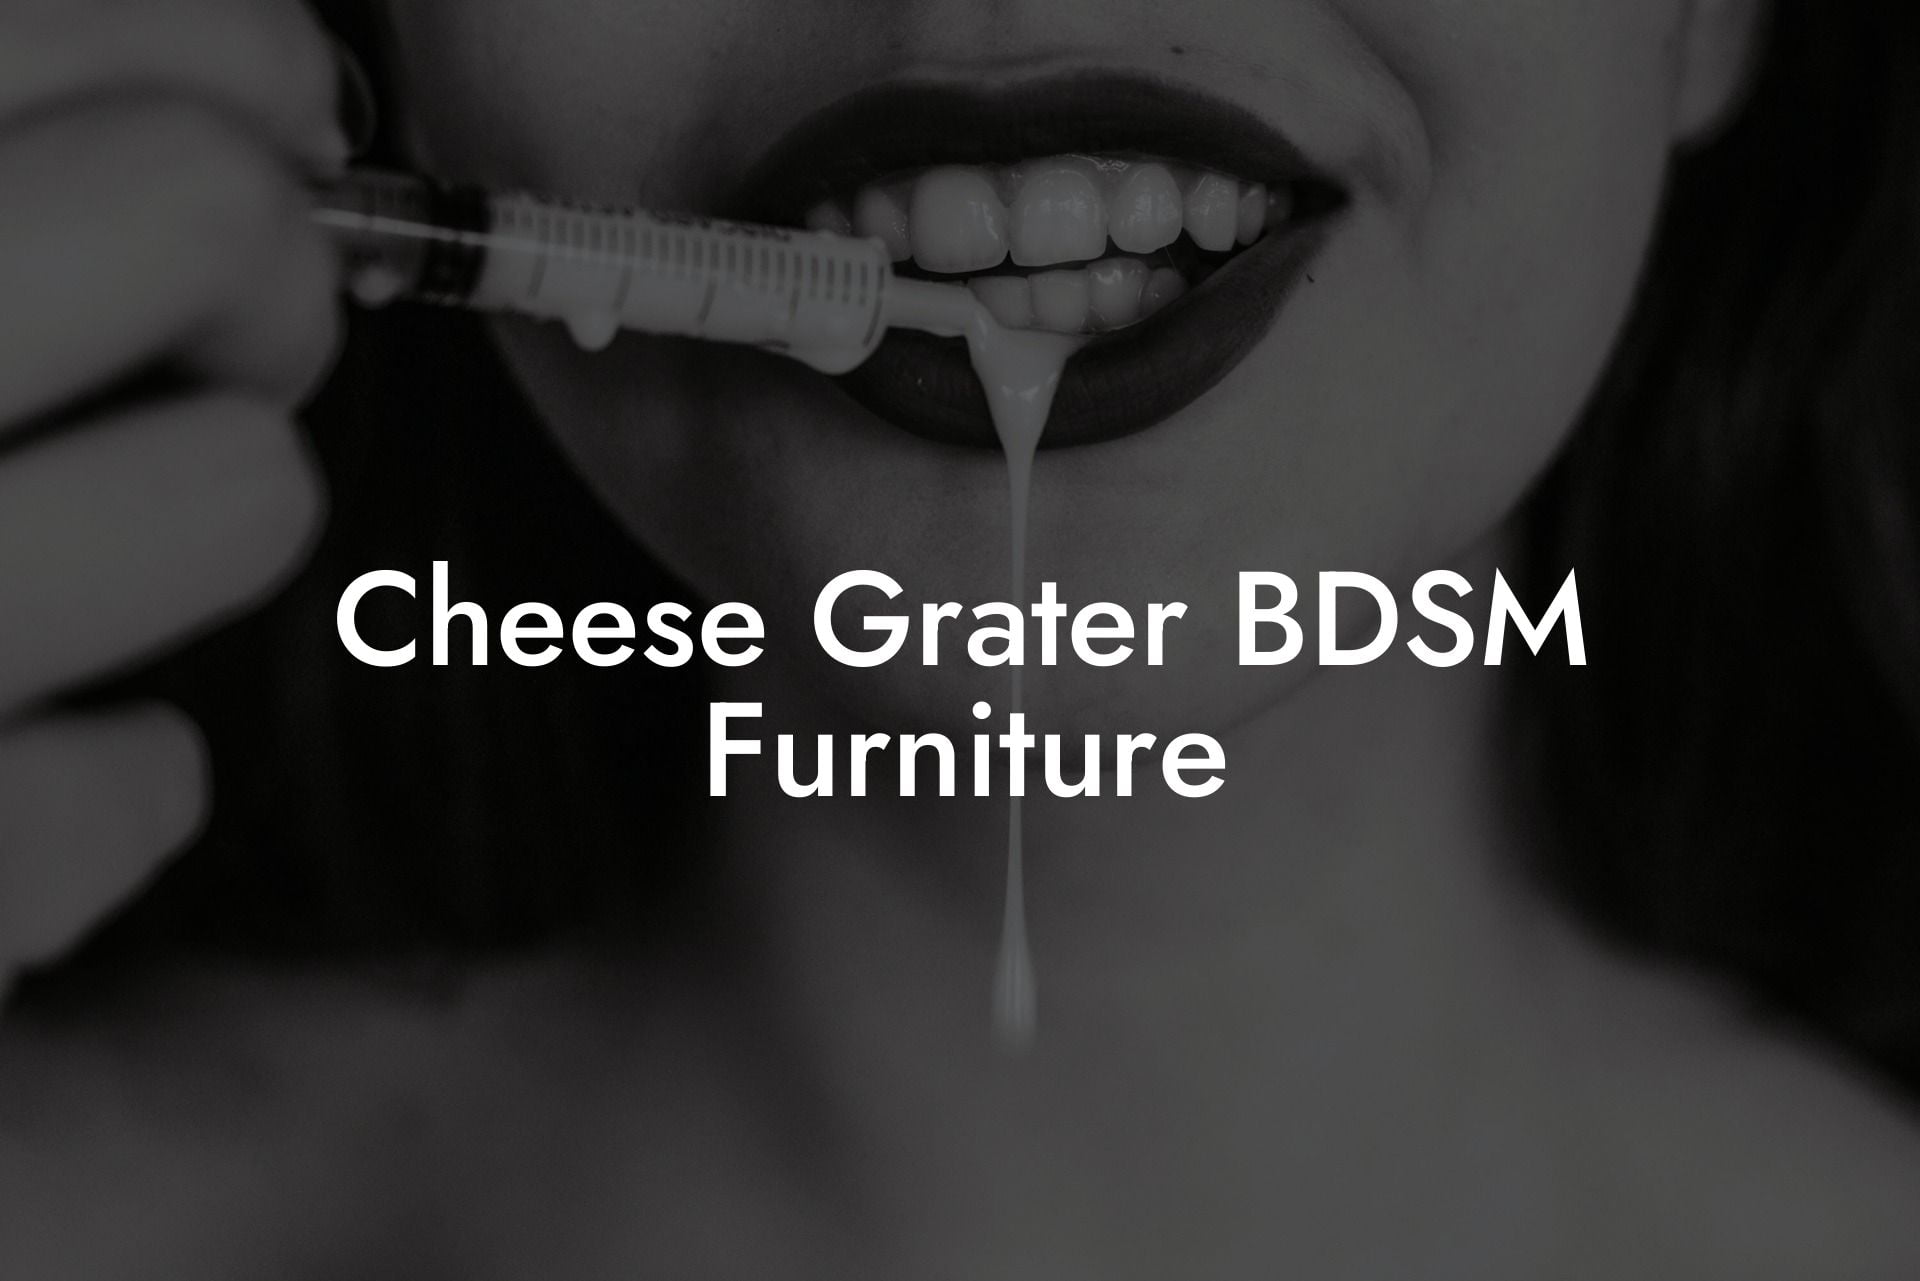 Cheese Grater BDSM Furniture